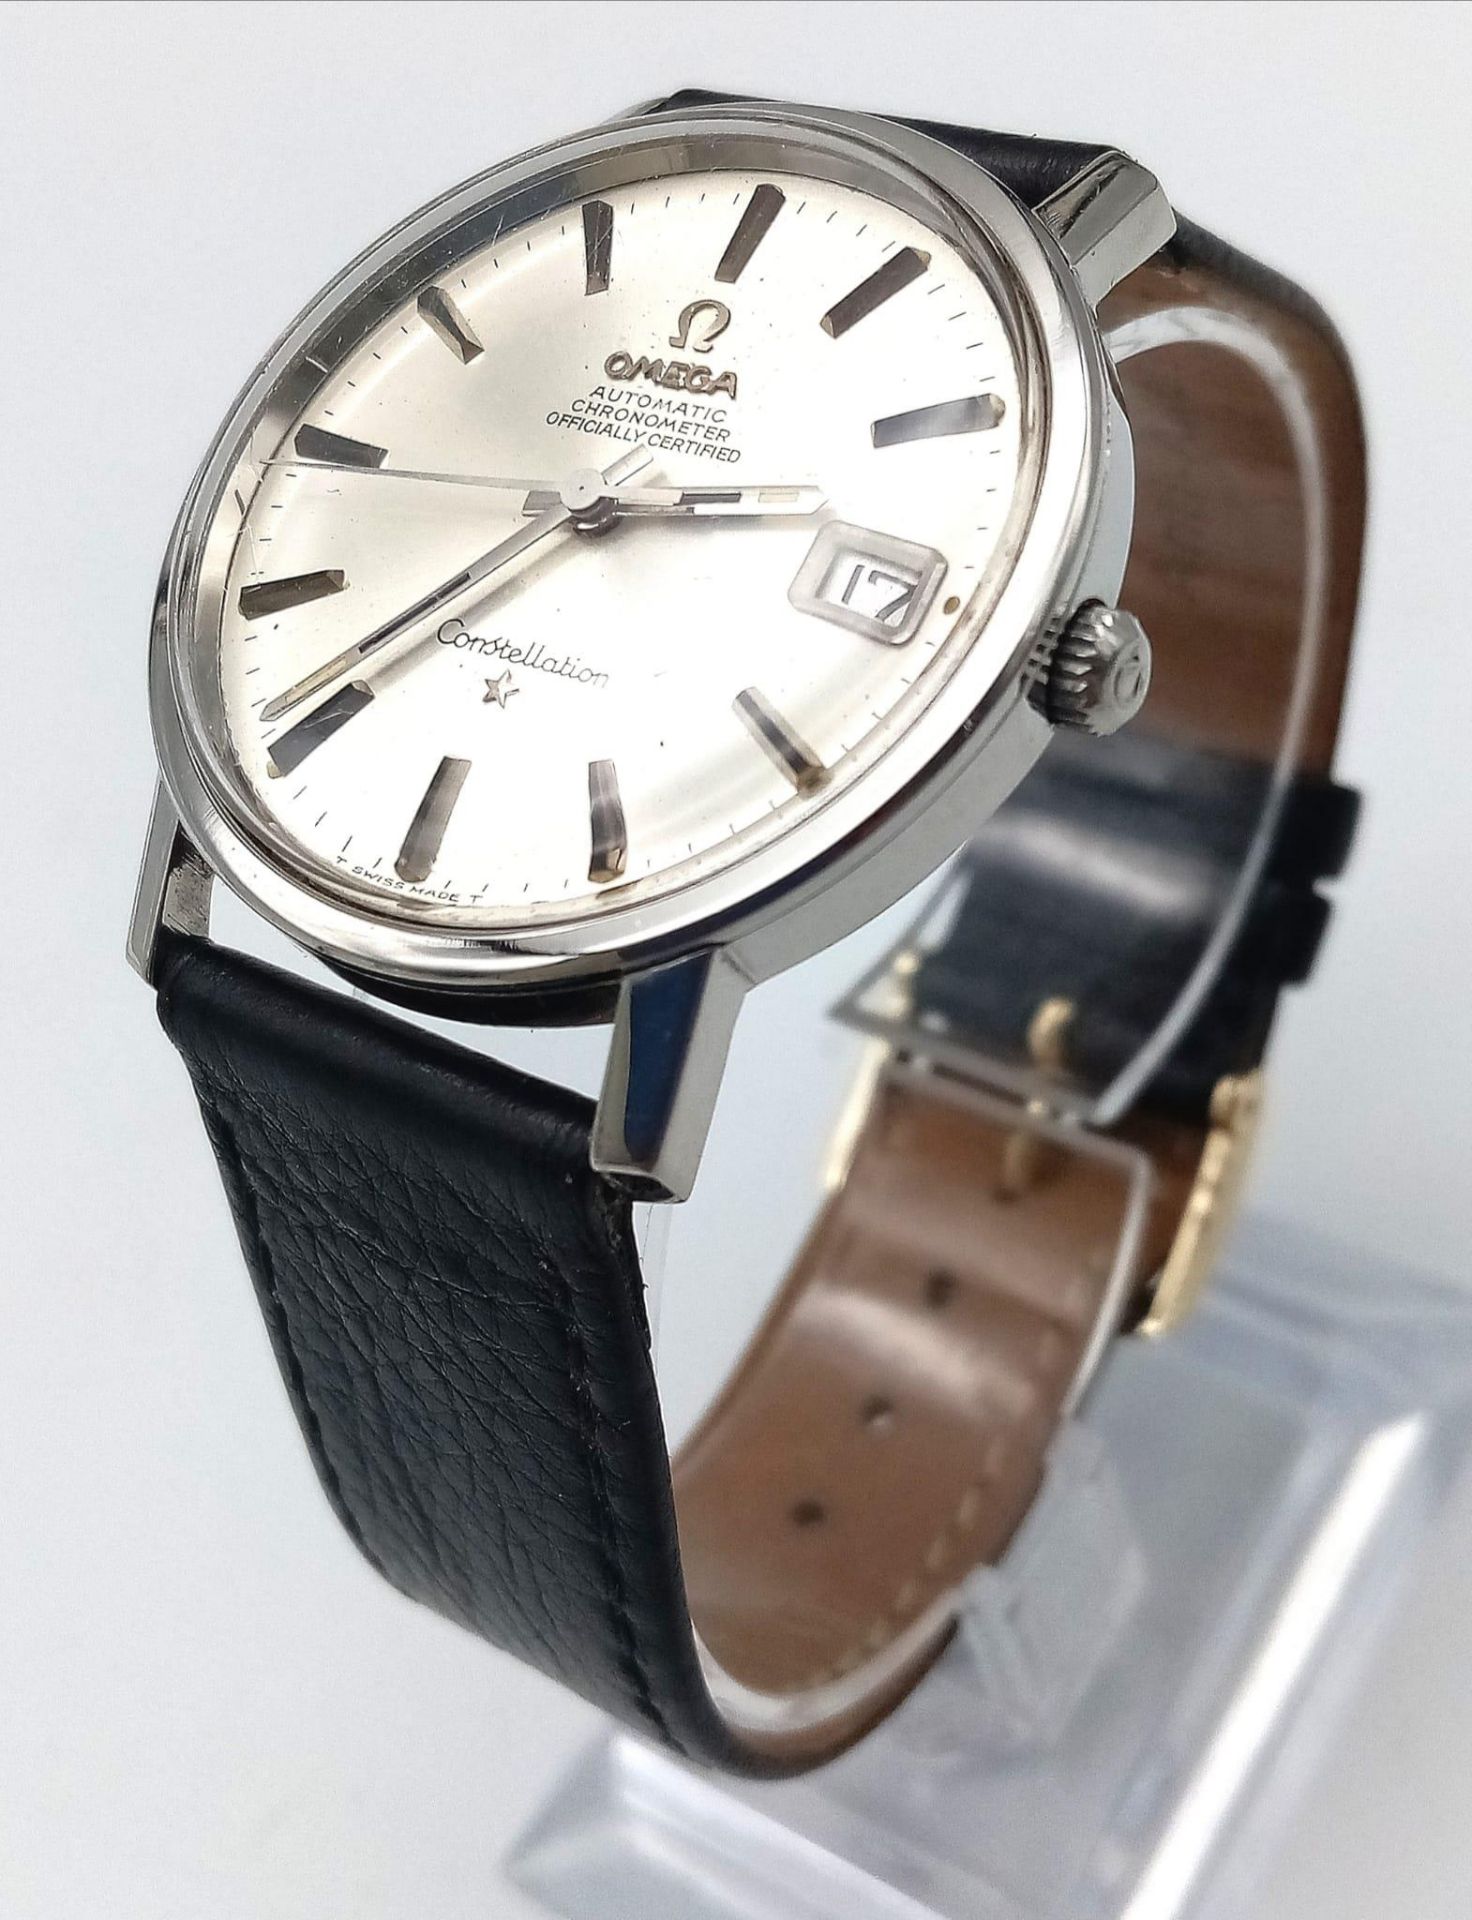 Omega Constellation Chronometer Men's Watch. Automatic movement, leather strap, 32mm dial. Circa - Image 2 of 13